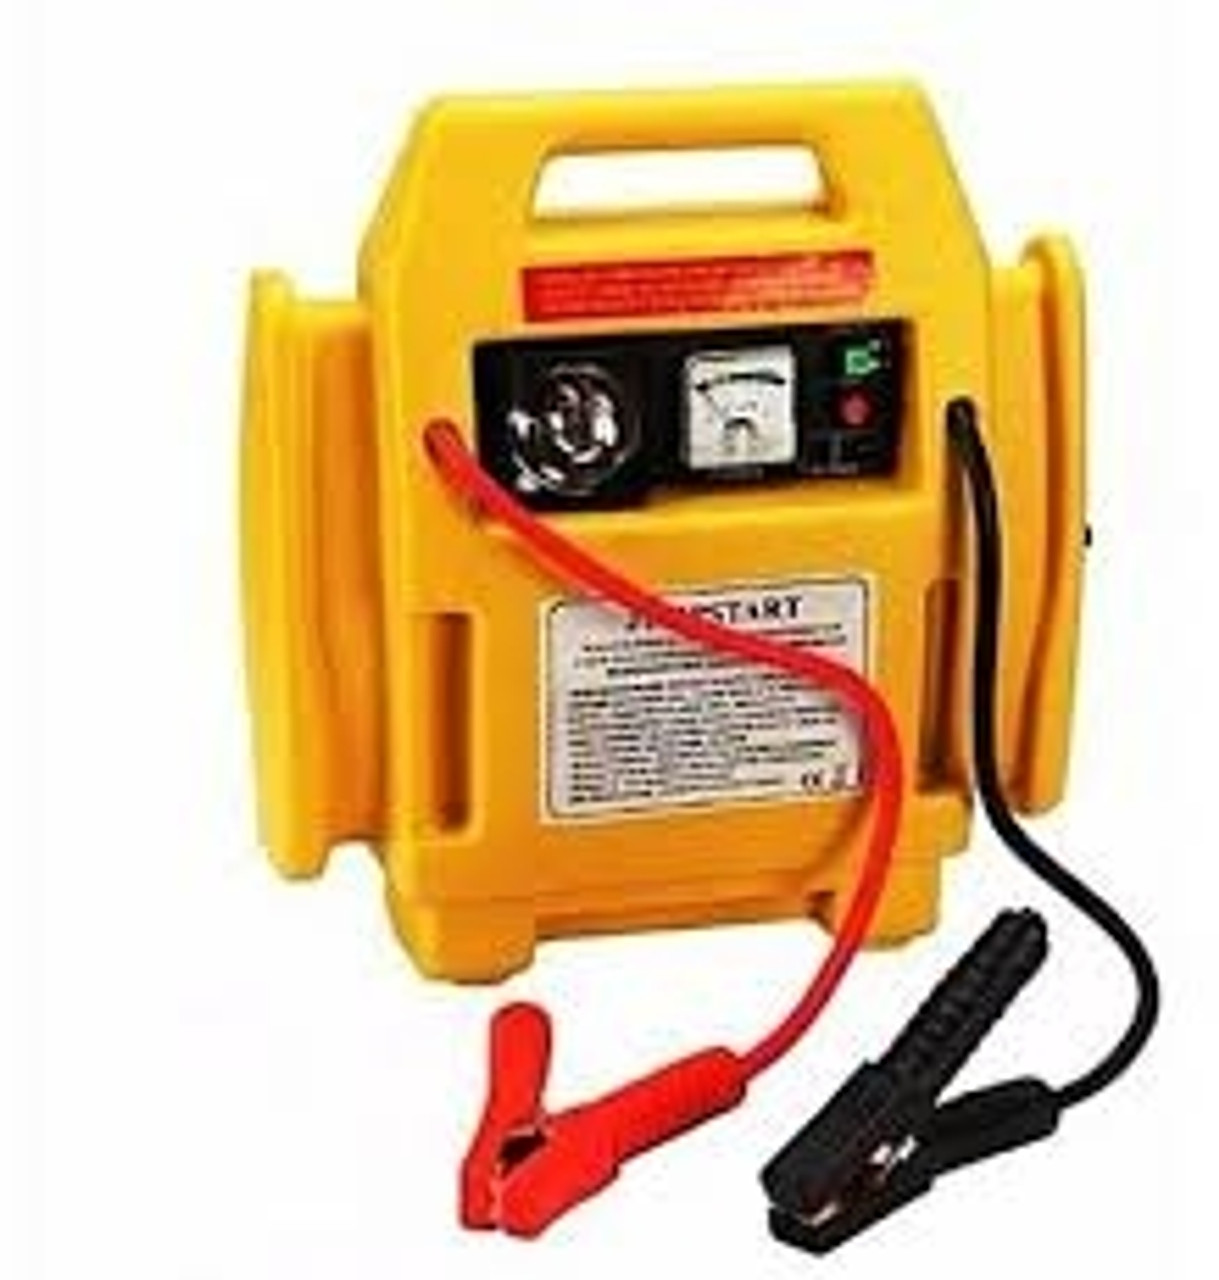 Buy 4-In-1 Jump Start & Air Compressor - 12V from GZ Industrial Supplies  Nigeria